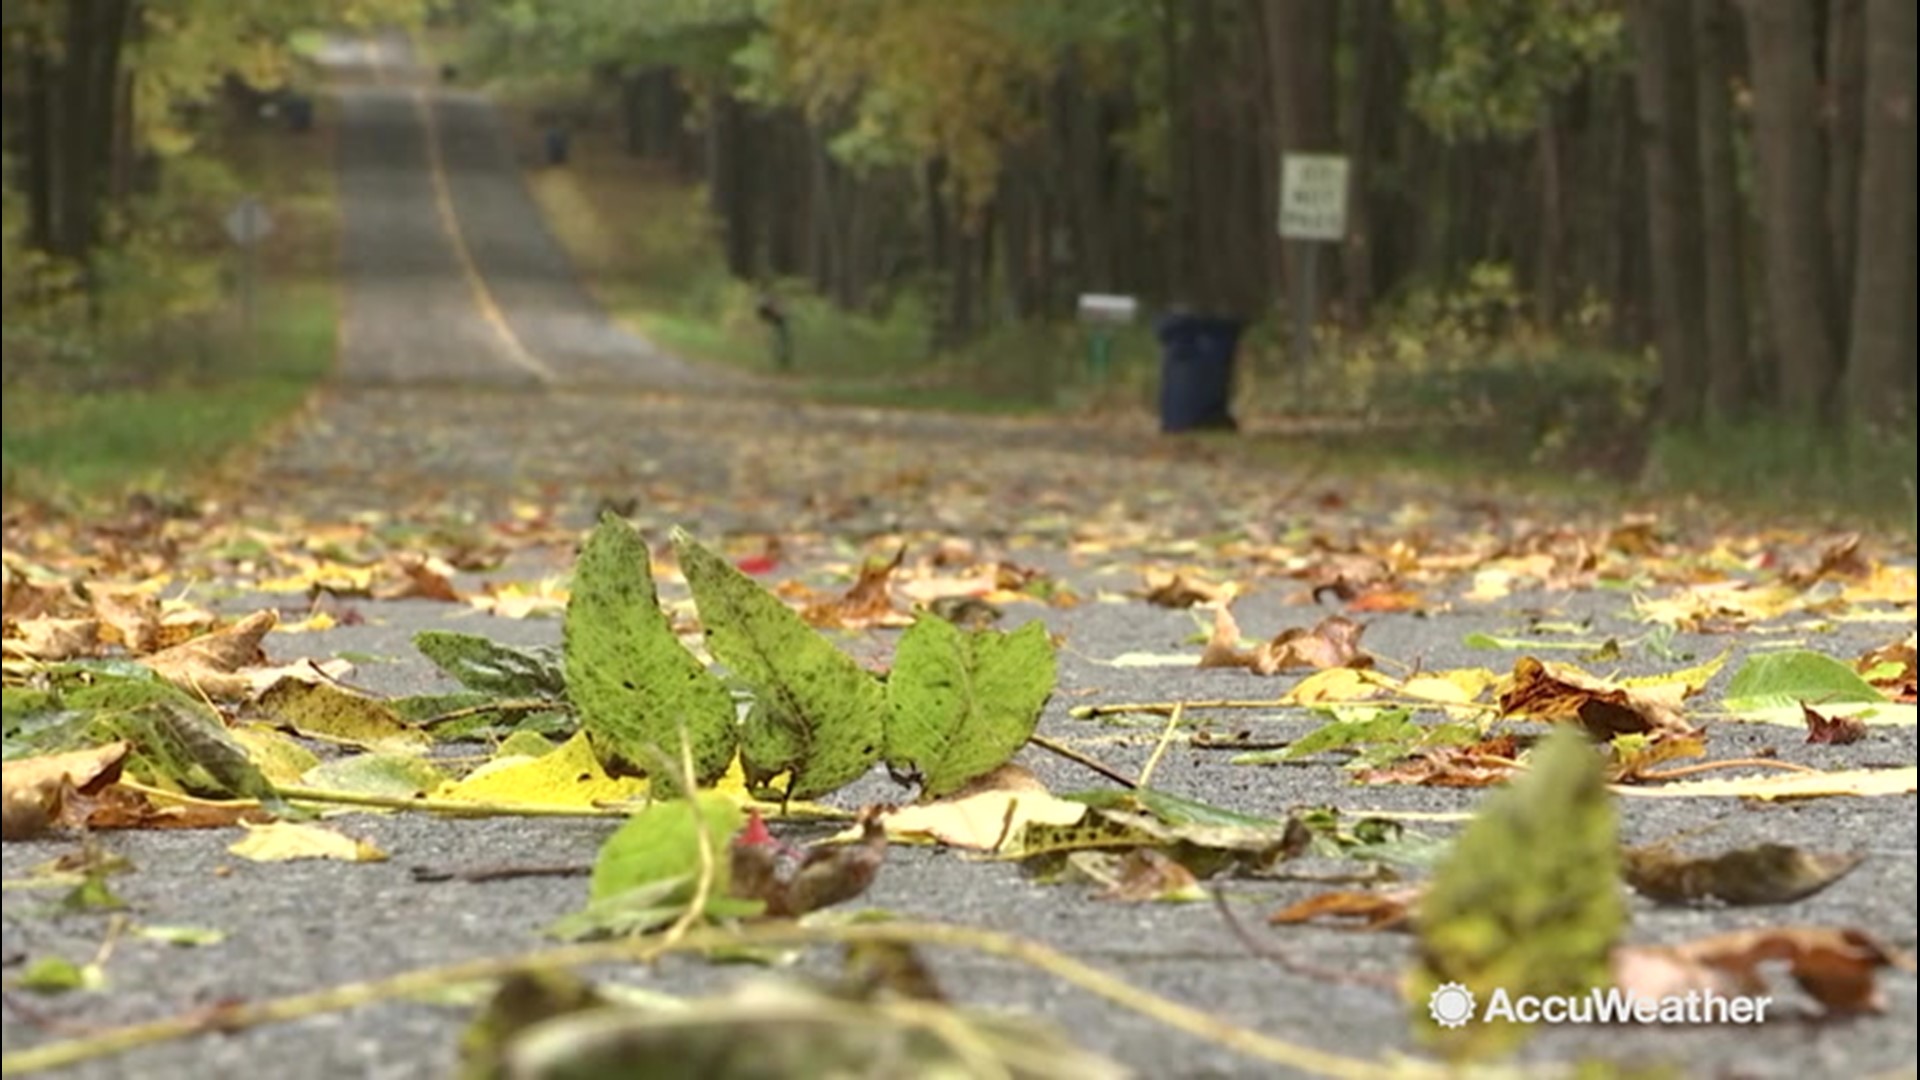 Rainy, fall-like weather hit Kalamazoo, Michigan, on Oct. 21, increasing winds that are tearing leaves off trees in droves.